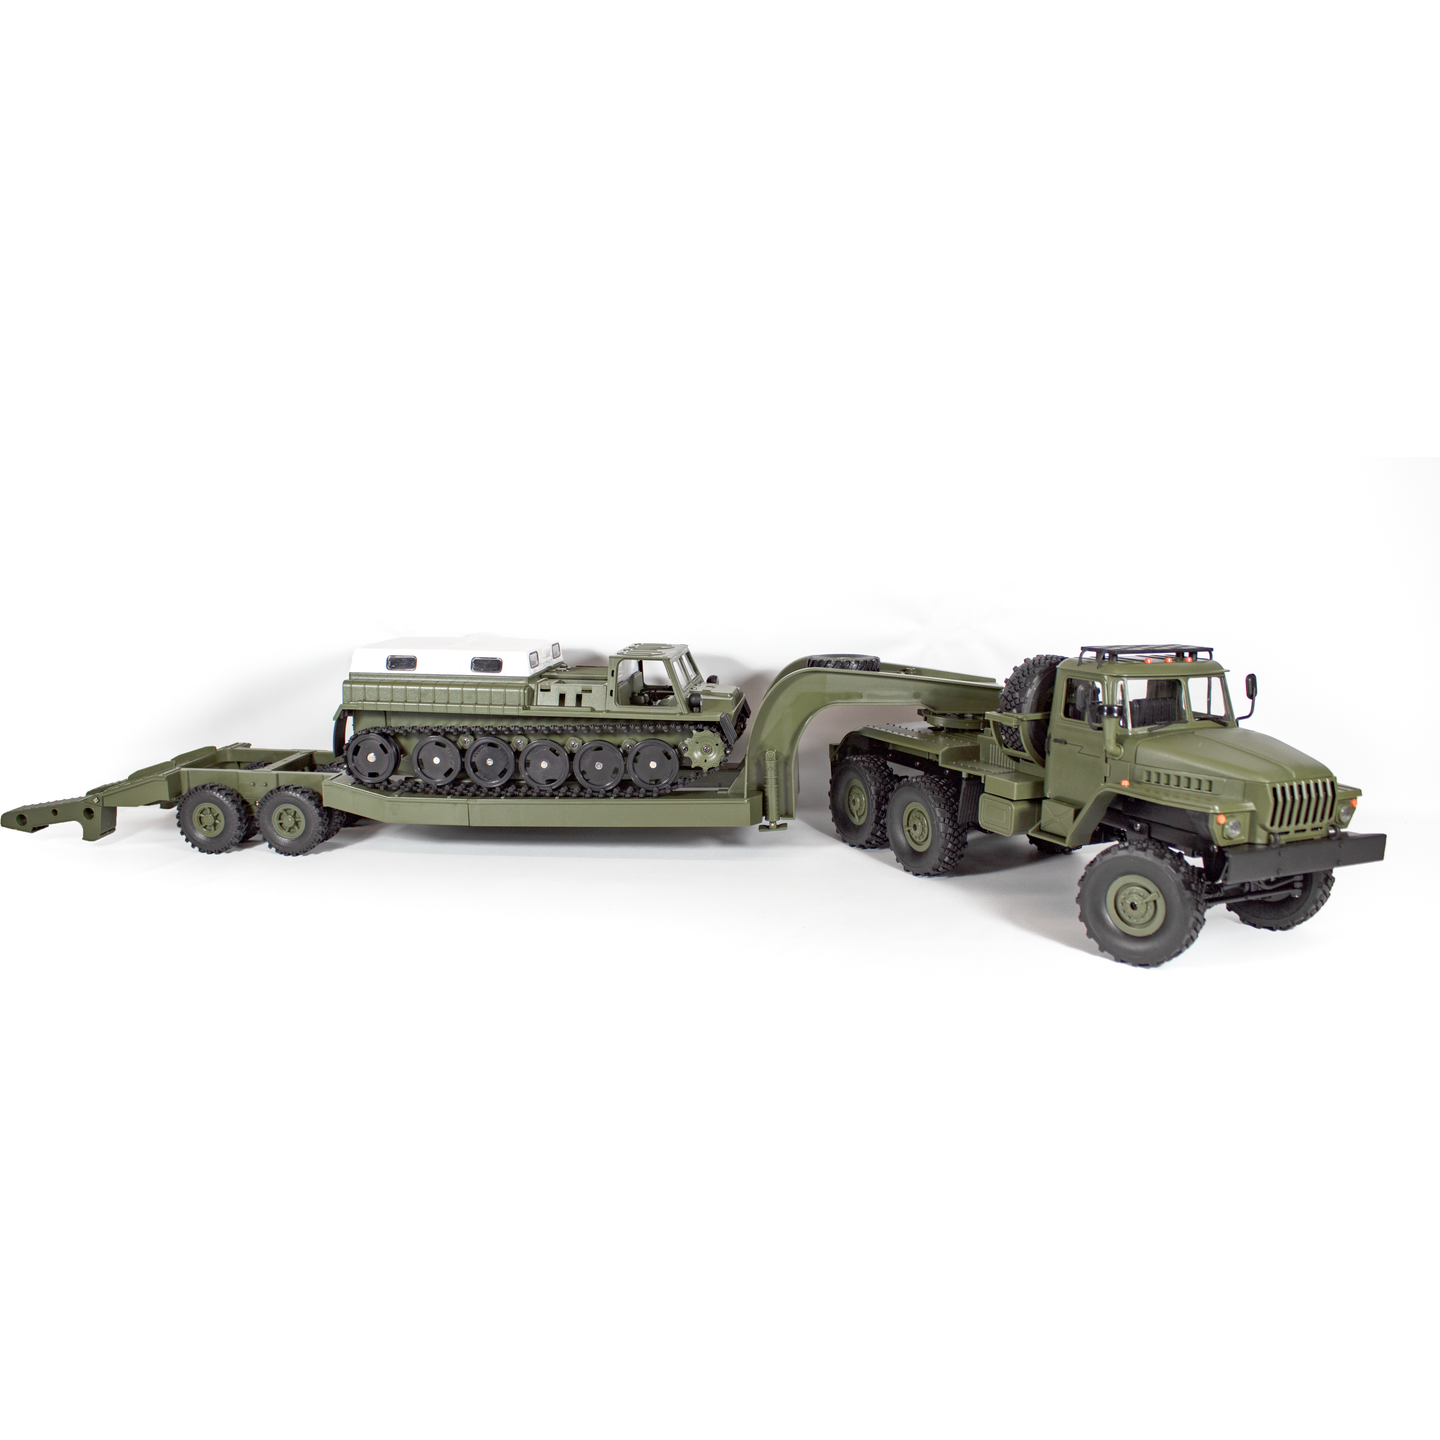 NEW 1/16 Scale RTR Transport Truck & Trailer